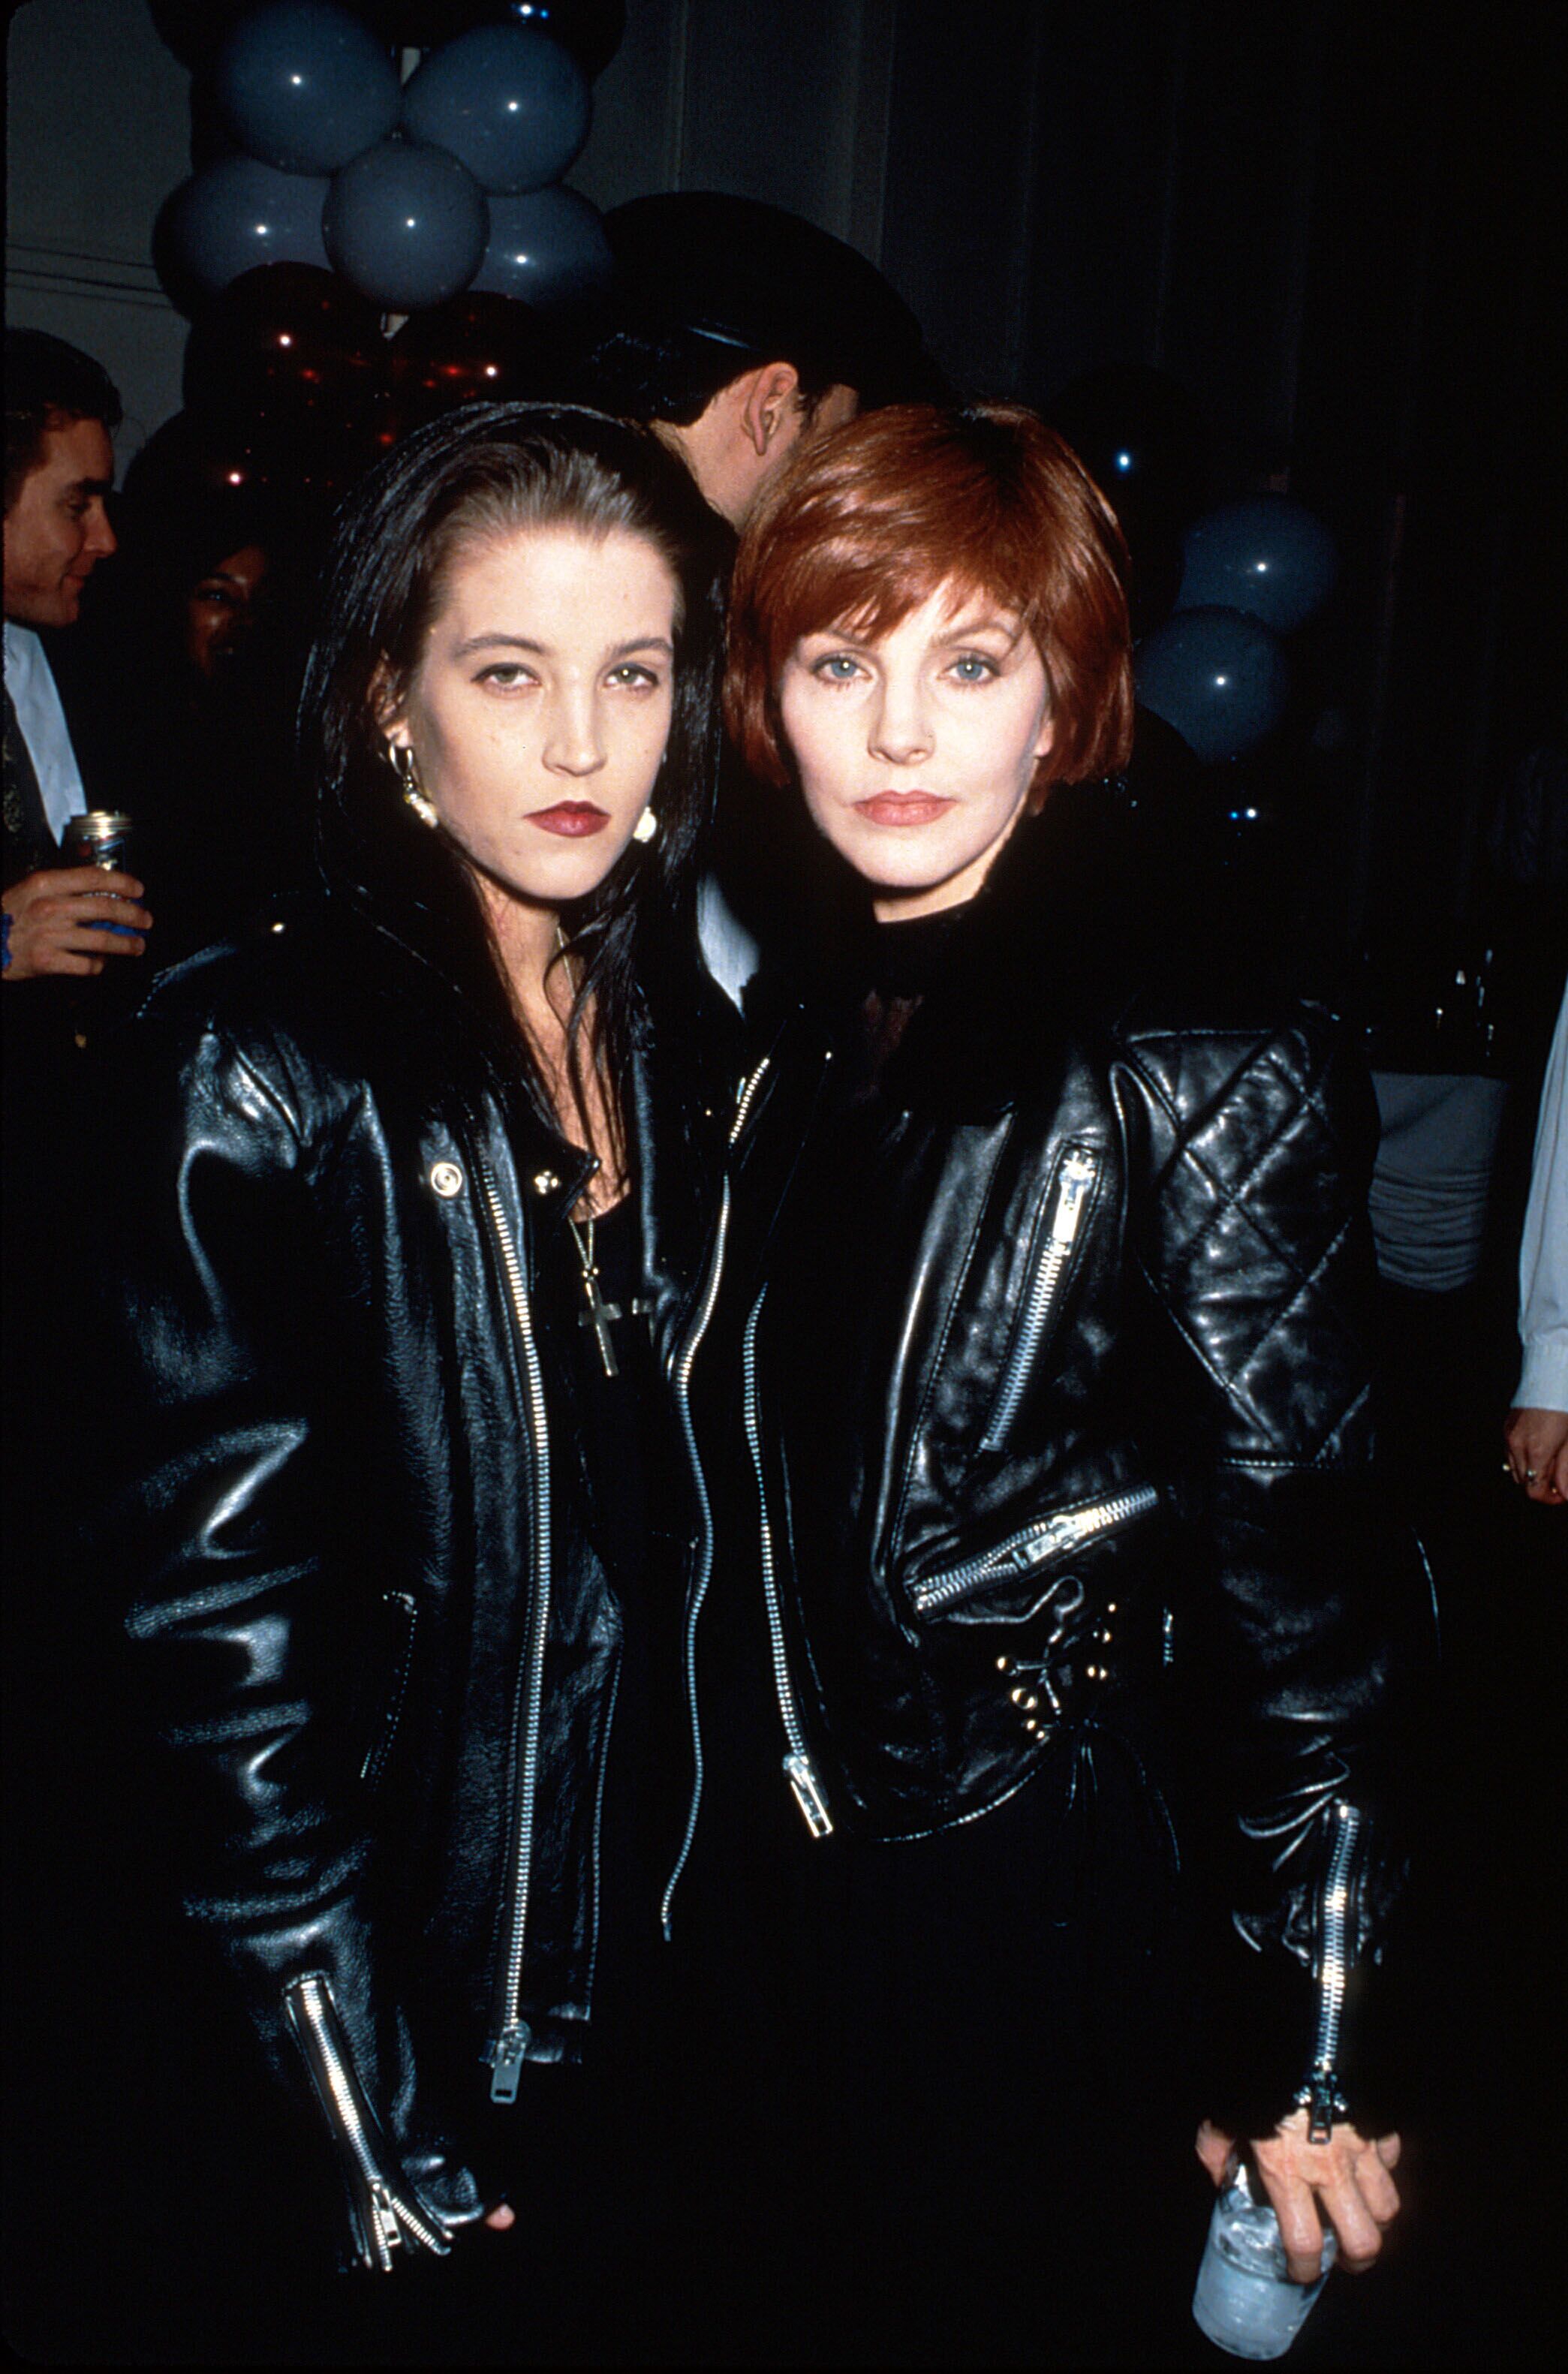 Lisa Marie Presley and mother, actress Priscilla Presley, both wearing Elvis-style black leather jackets | Source: Getty Images